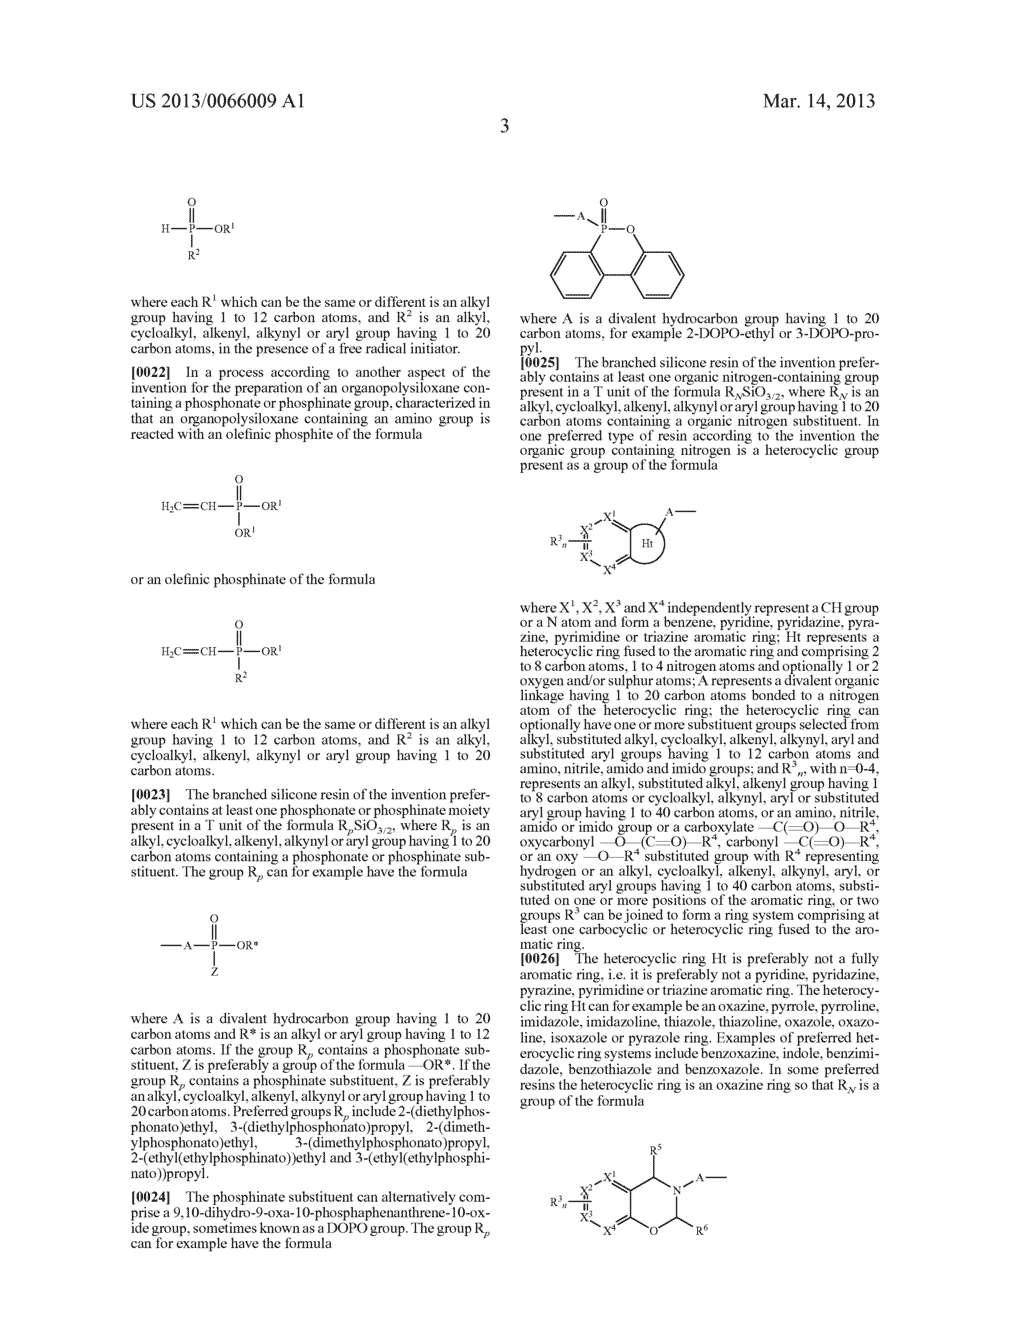 Silicone Resins And Their Use In Polymer Compositions - diagram, schematic, and image 04